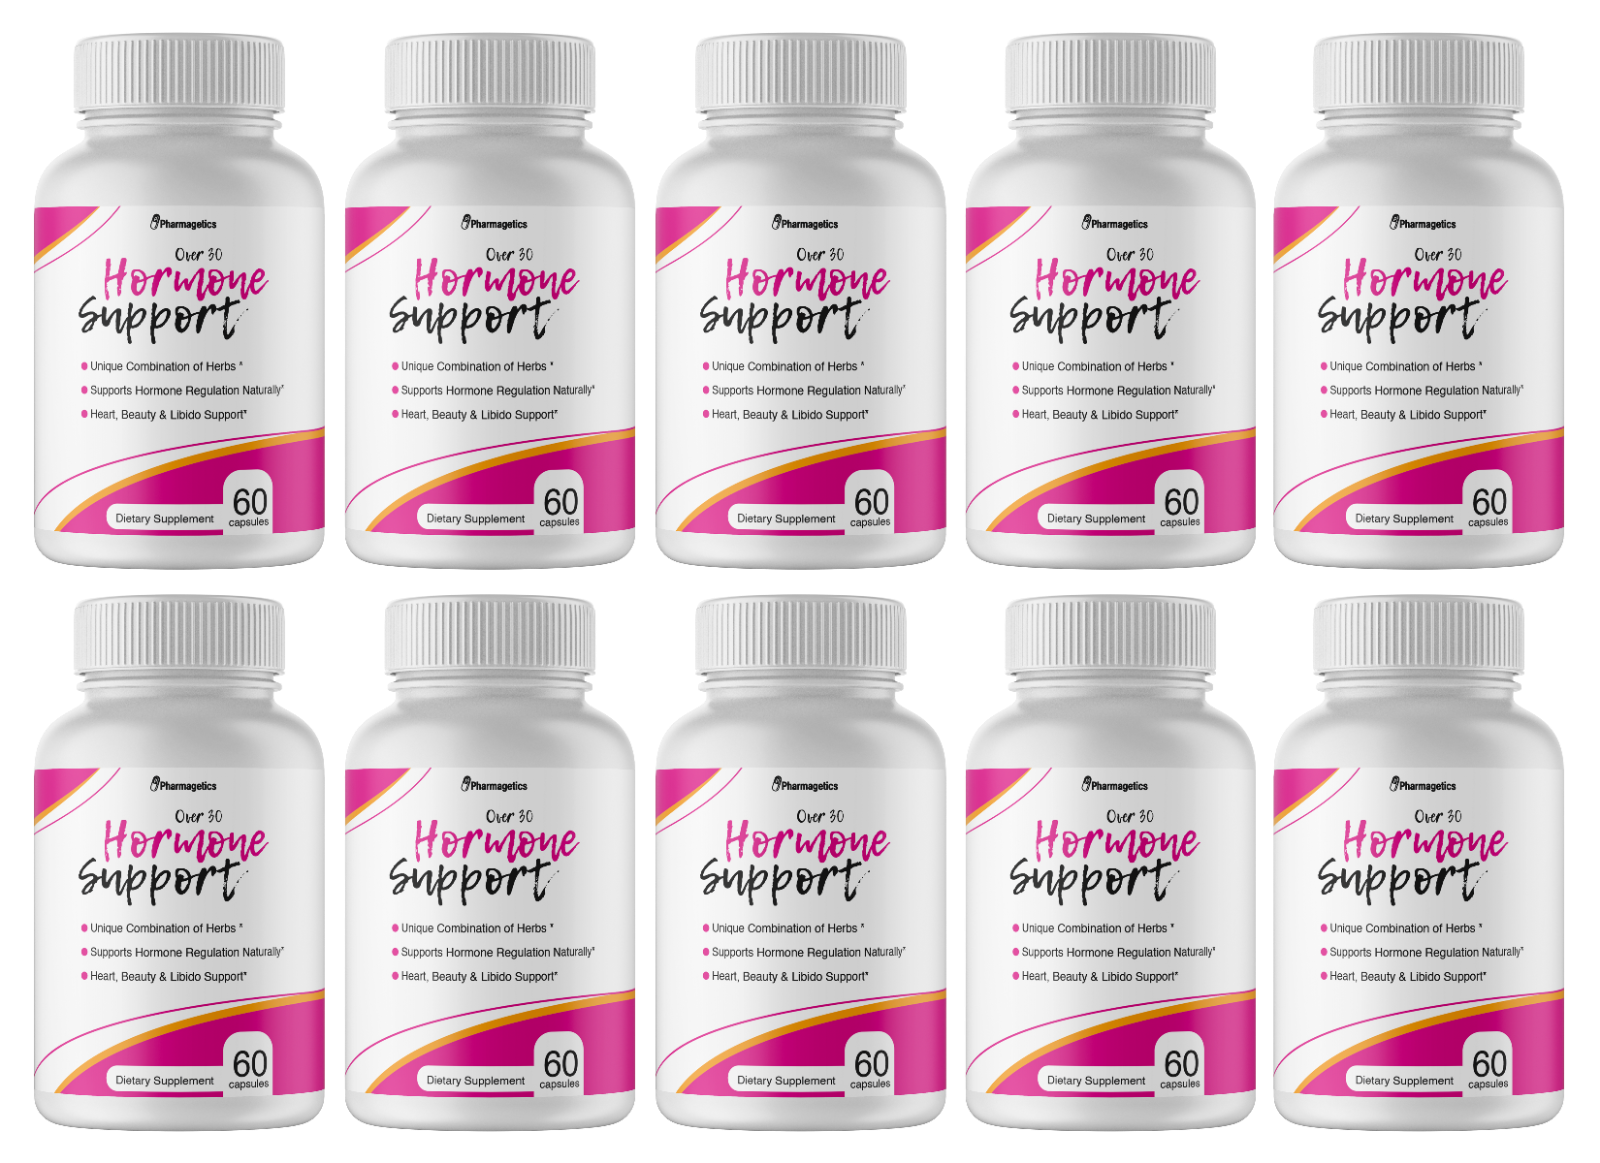 Over 30 Hormone Support Dietary Supplement -10 Bottles 600 Capsules